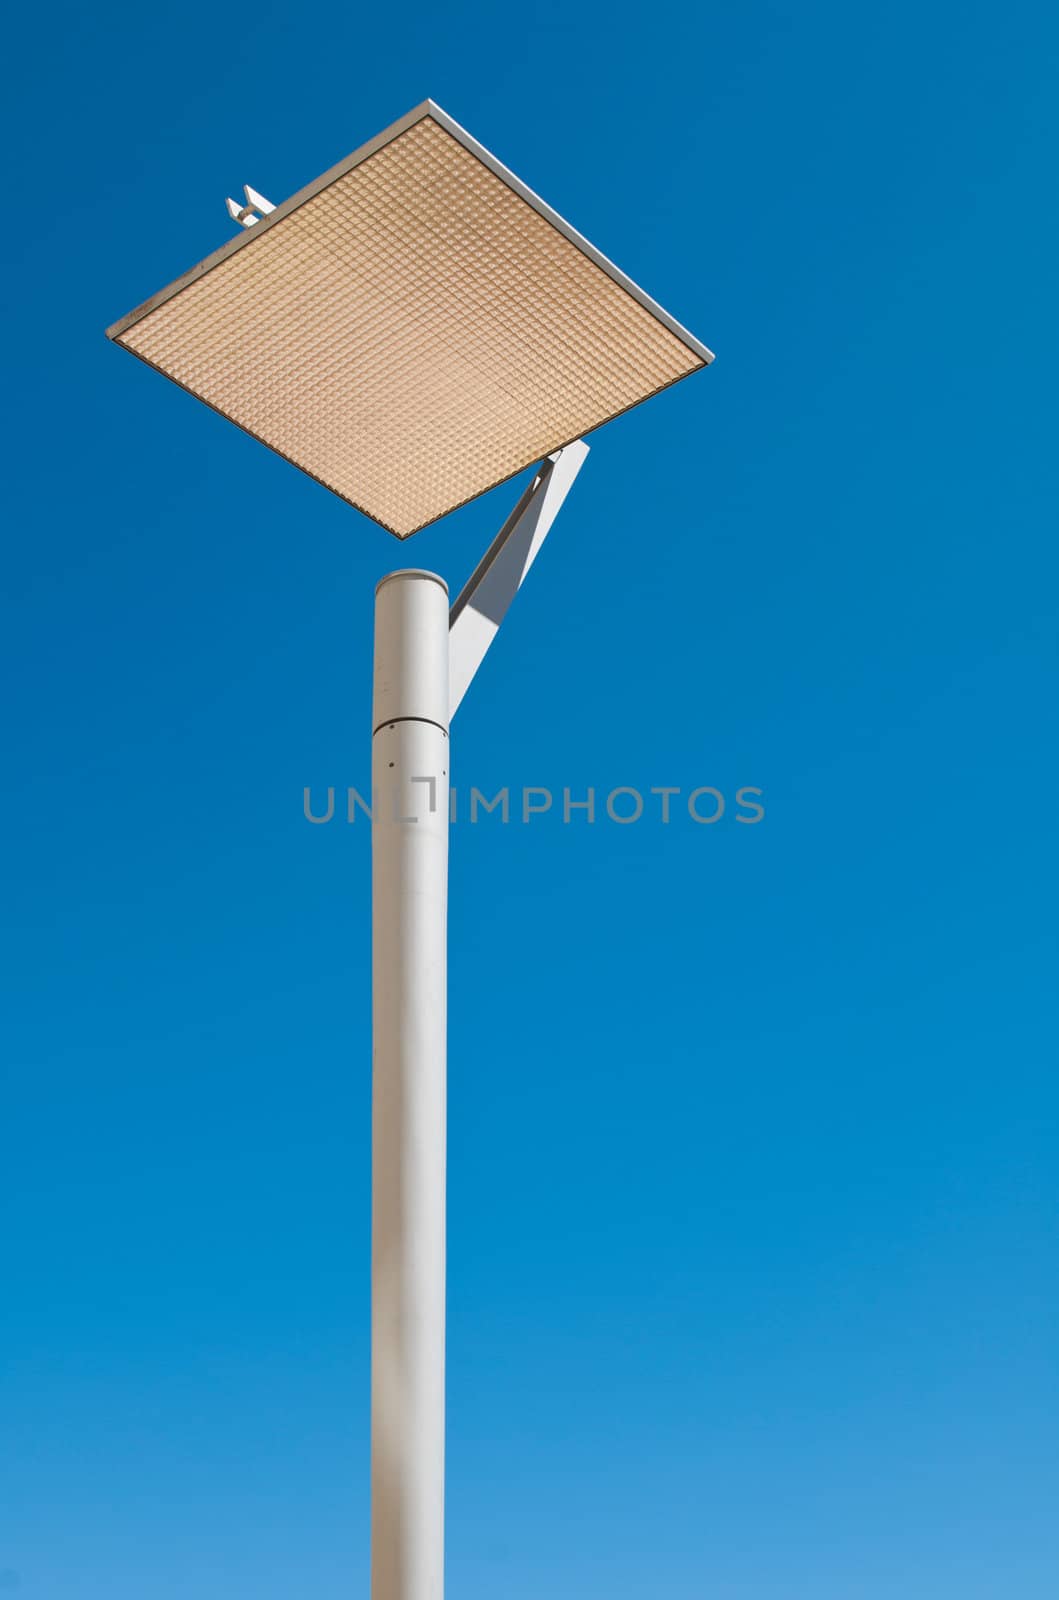 Lamp post by luissantos84